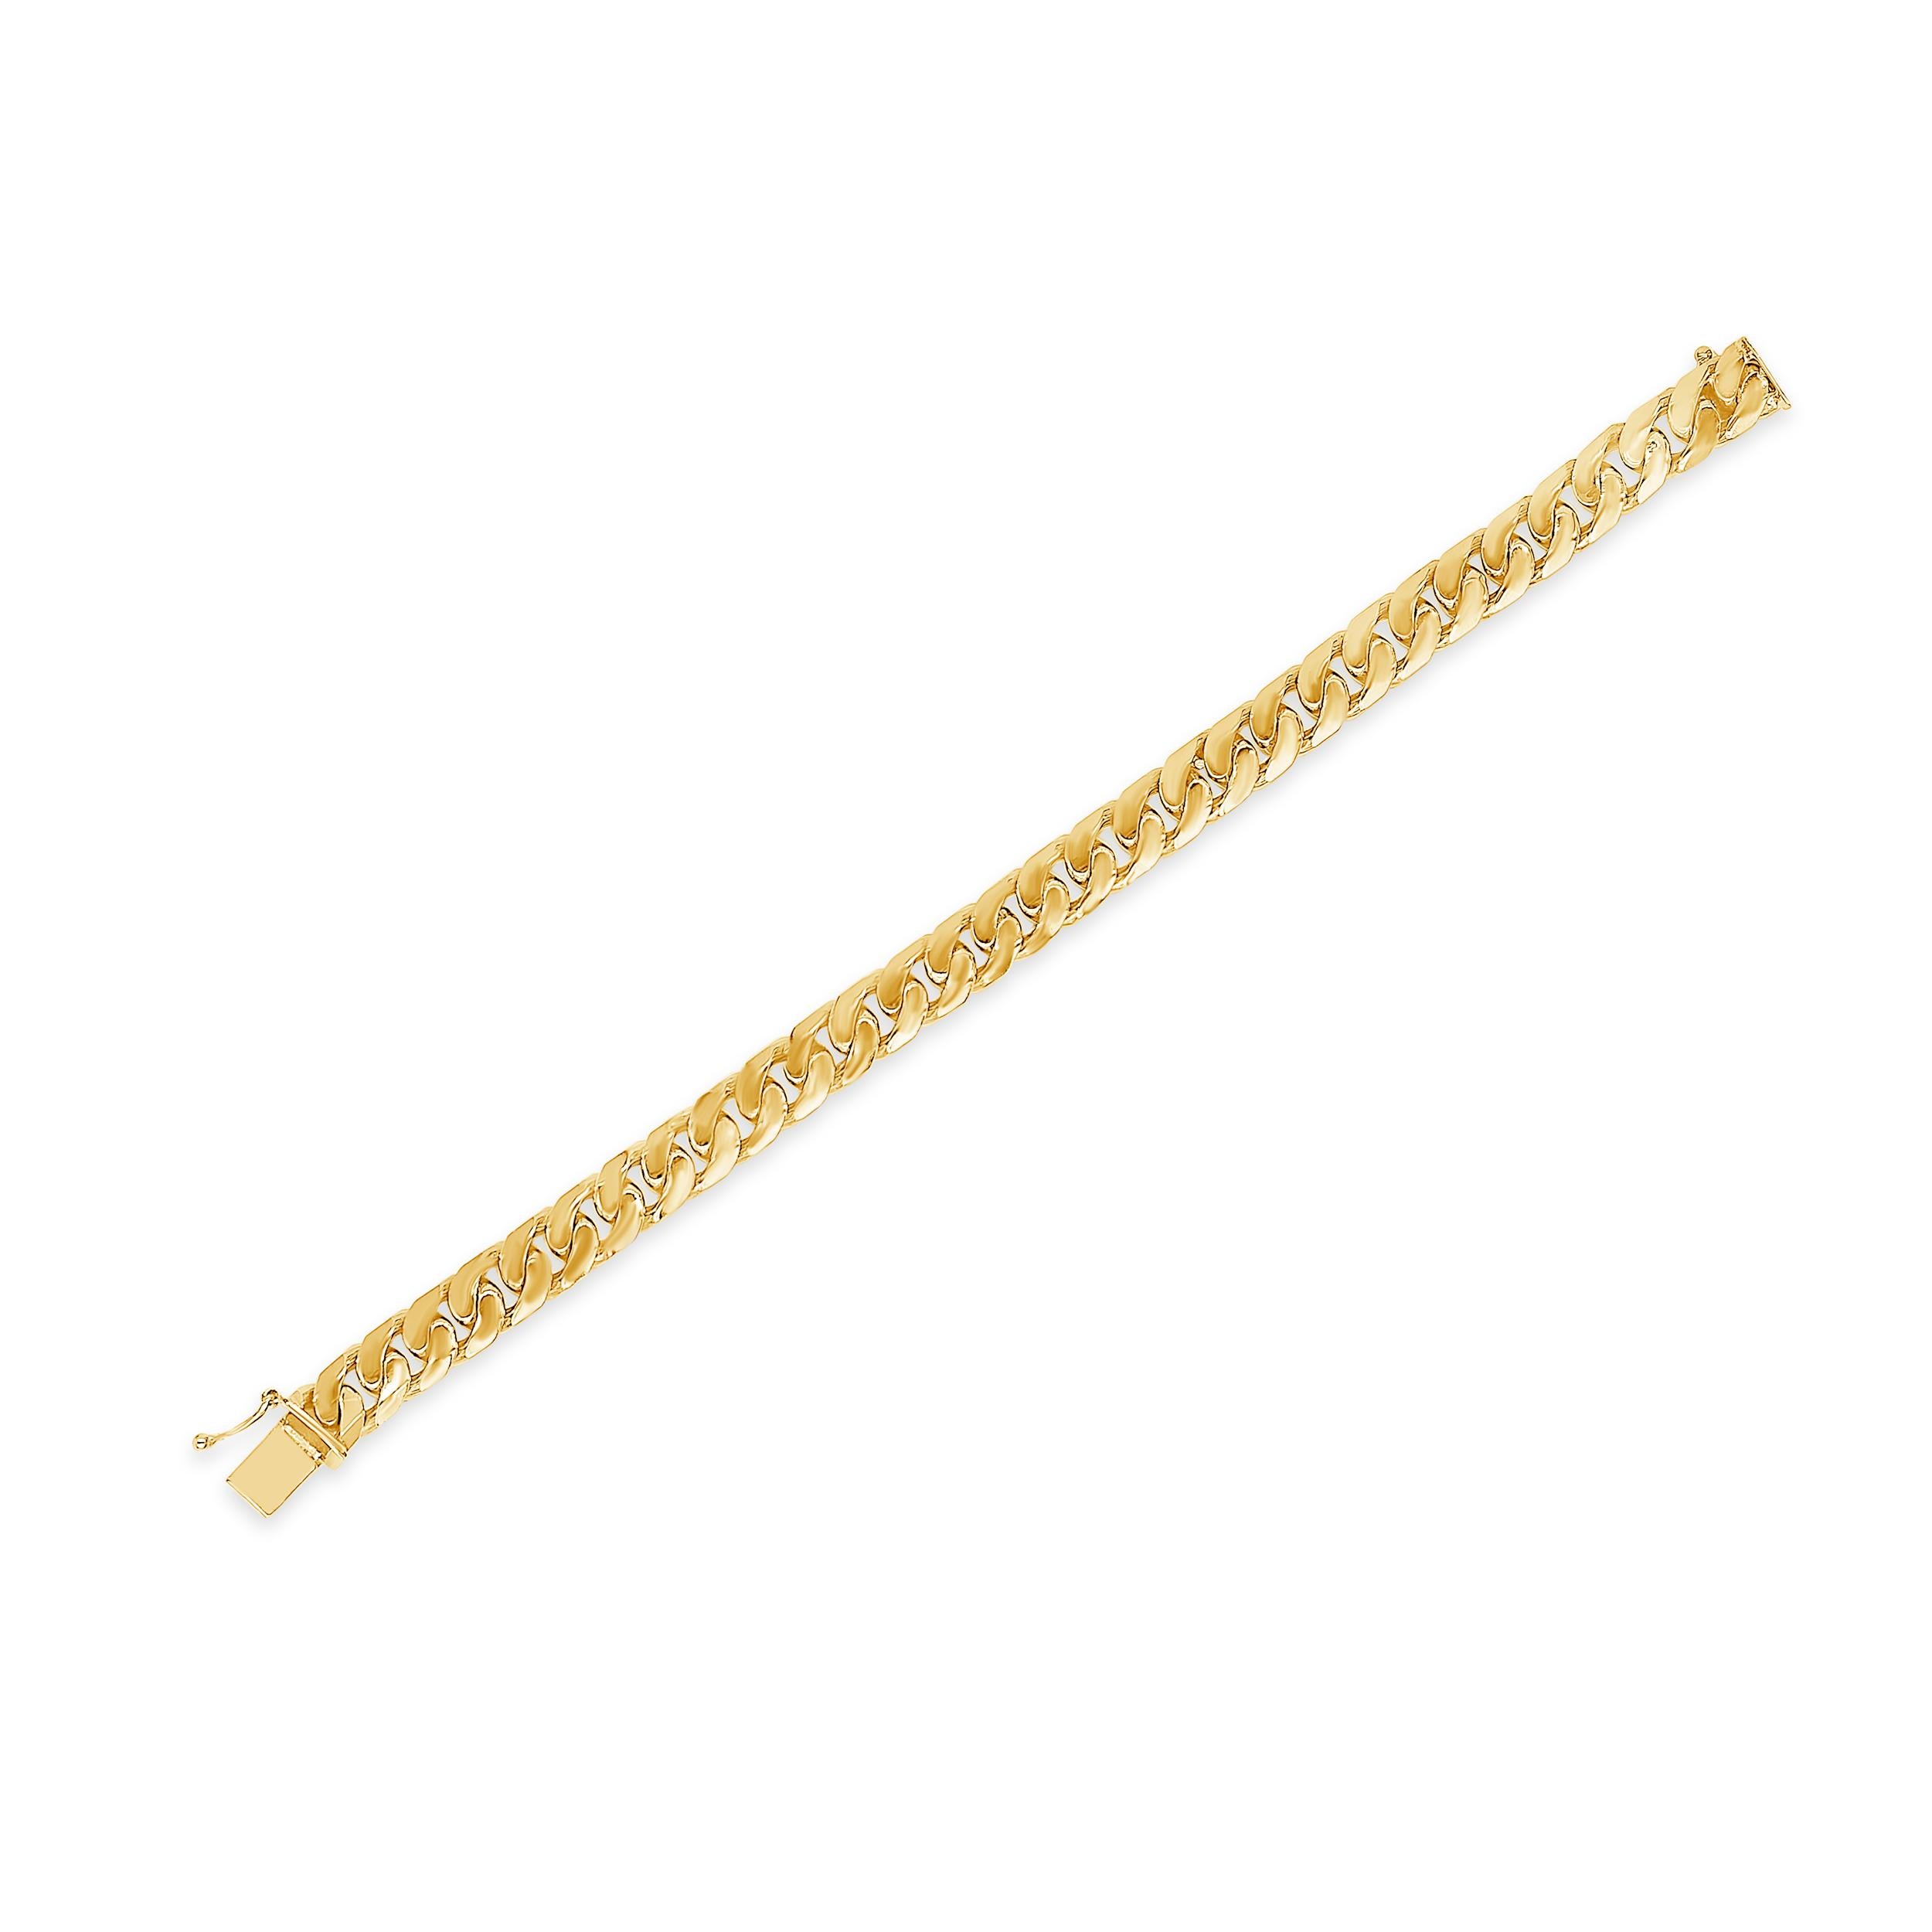 A classic cuban link chain made in 14 karat yellow gold. Weighs 55.43 grams. 7.5 inches in length.

